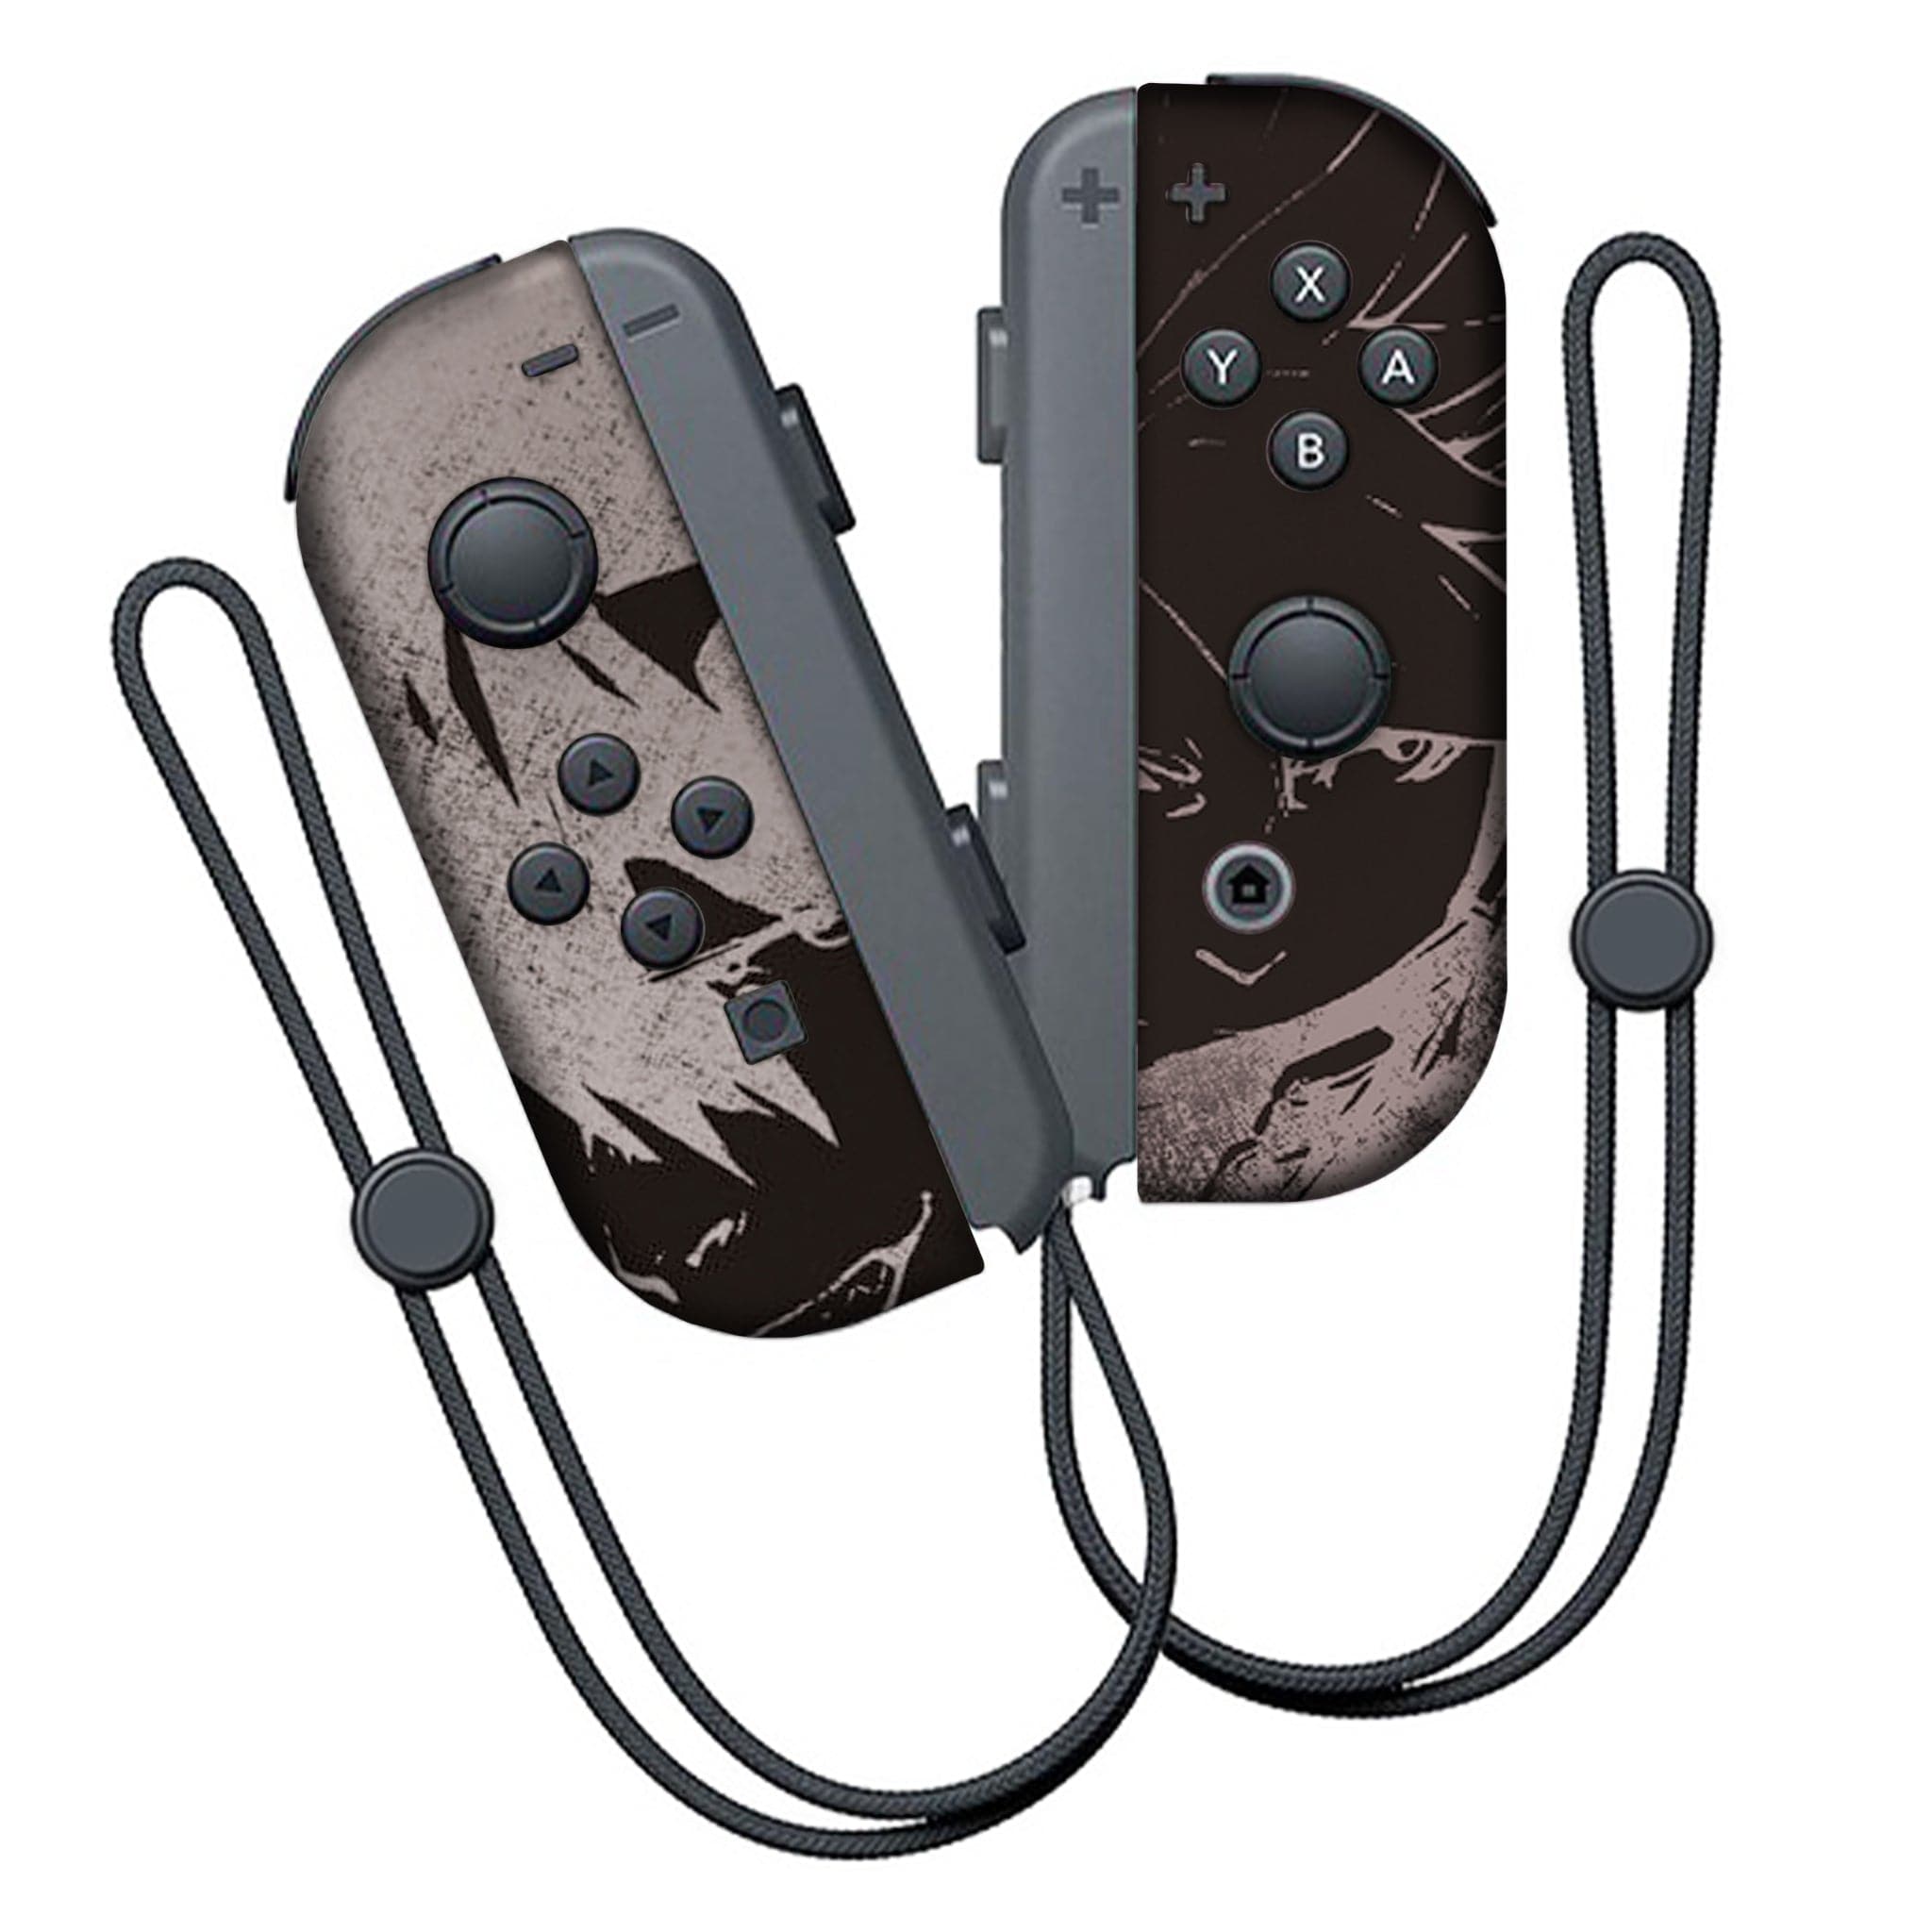 Guilty Gear Nintendo Switch Joy-Con Left & Right Switch Controllers